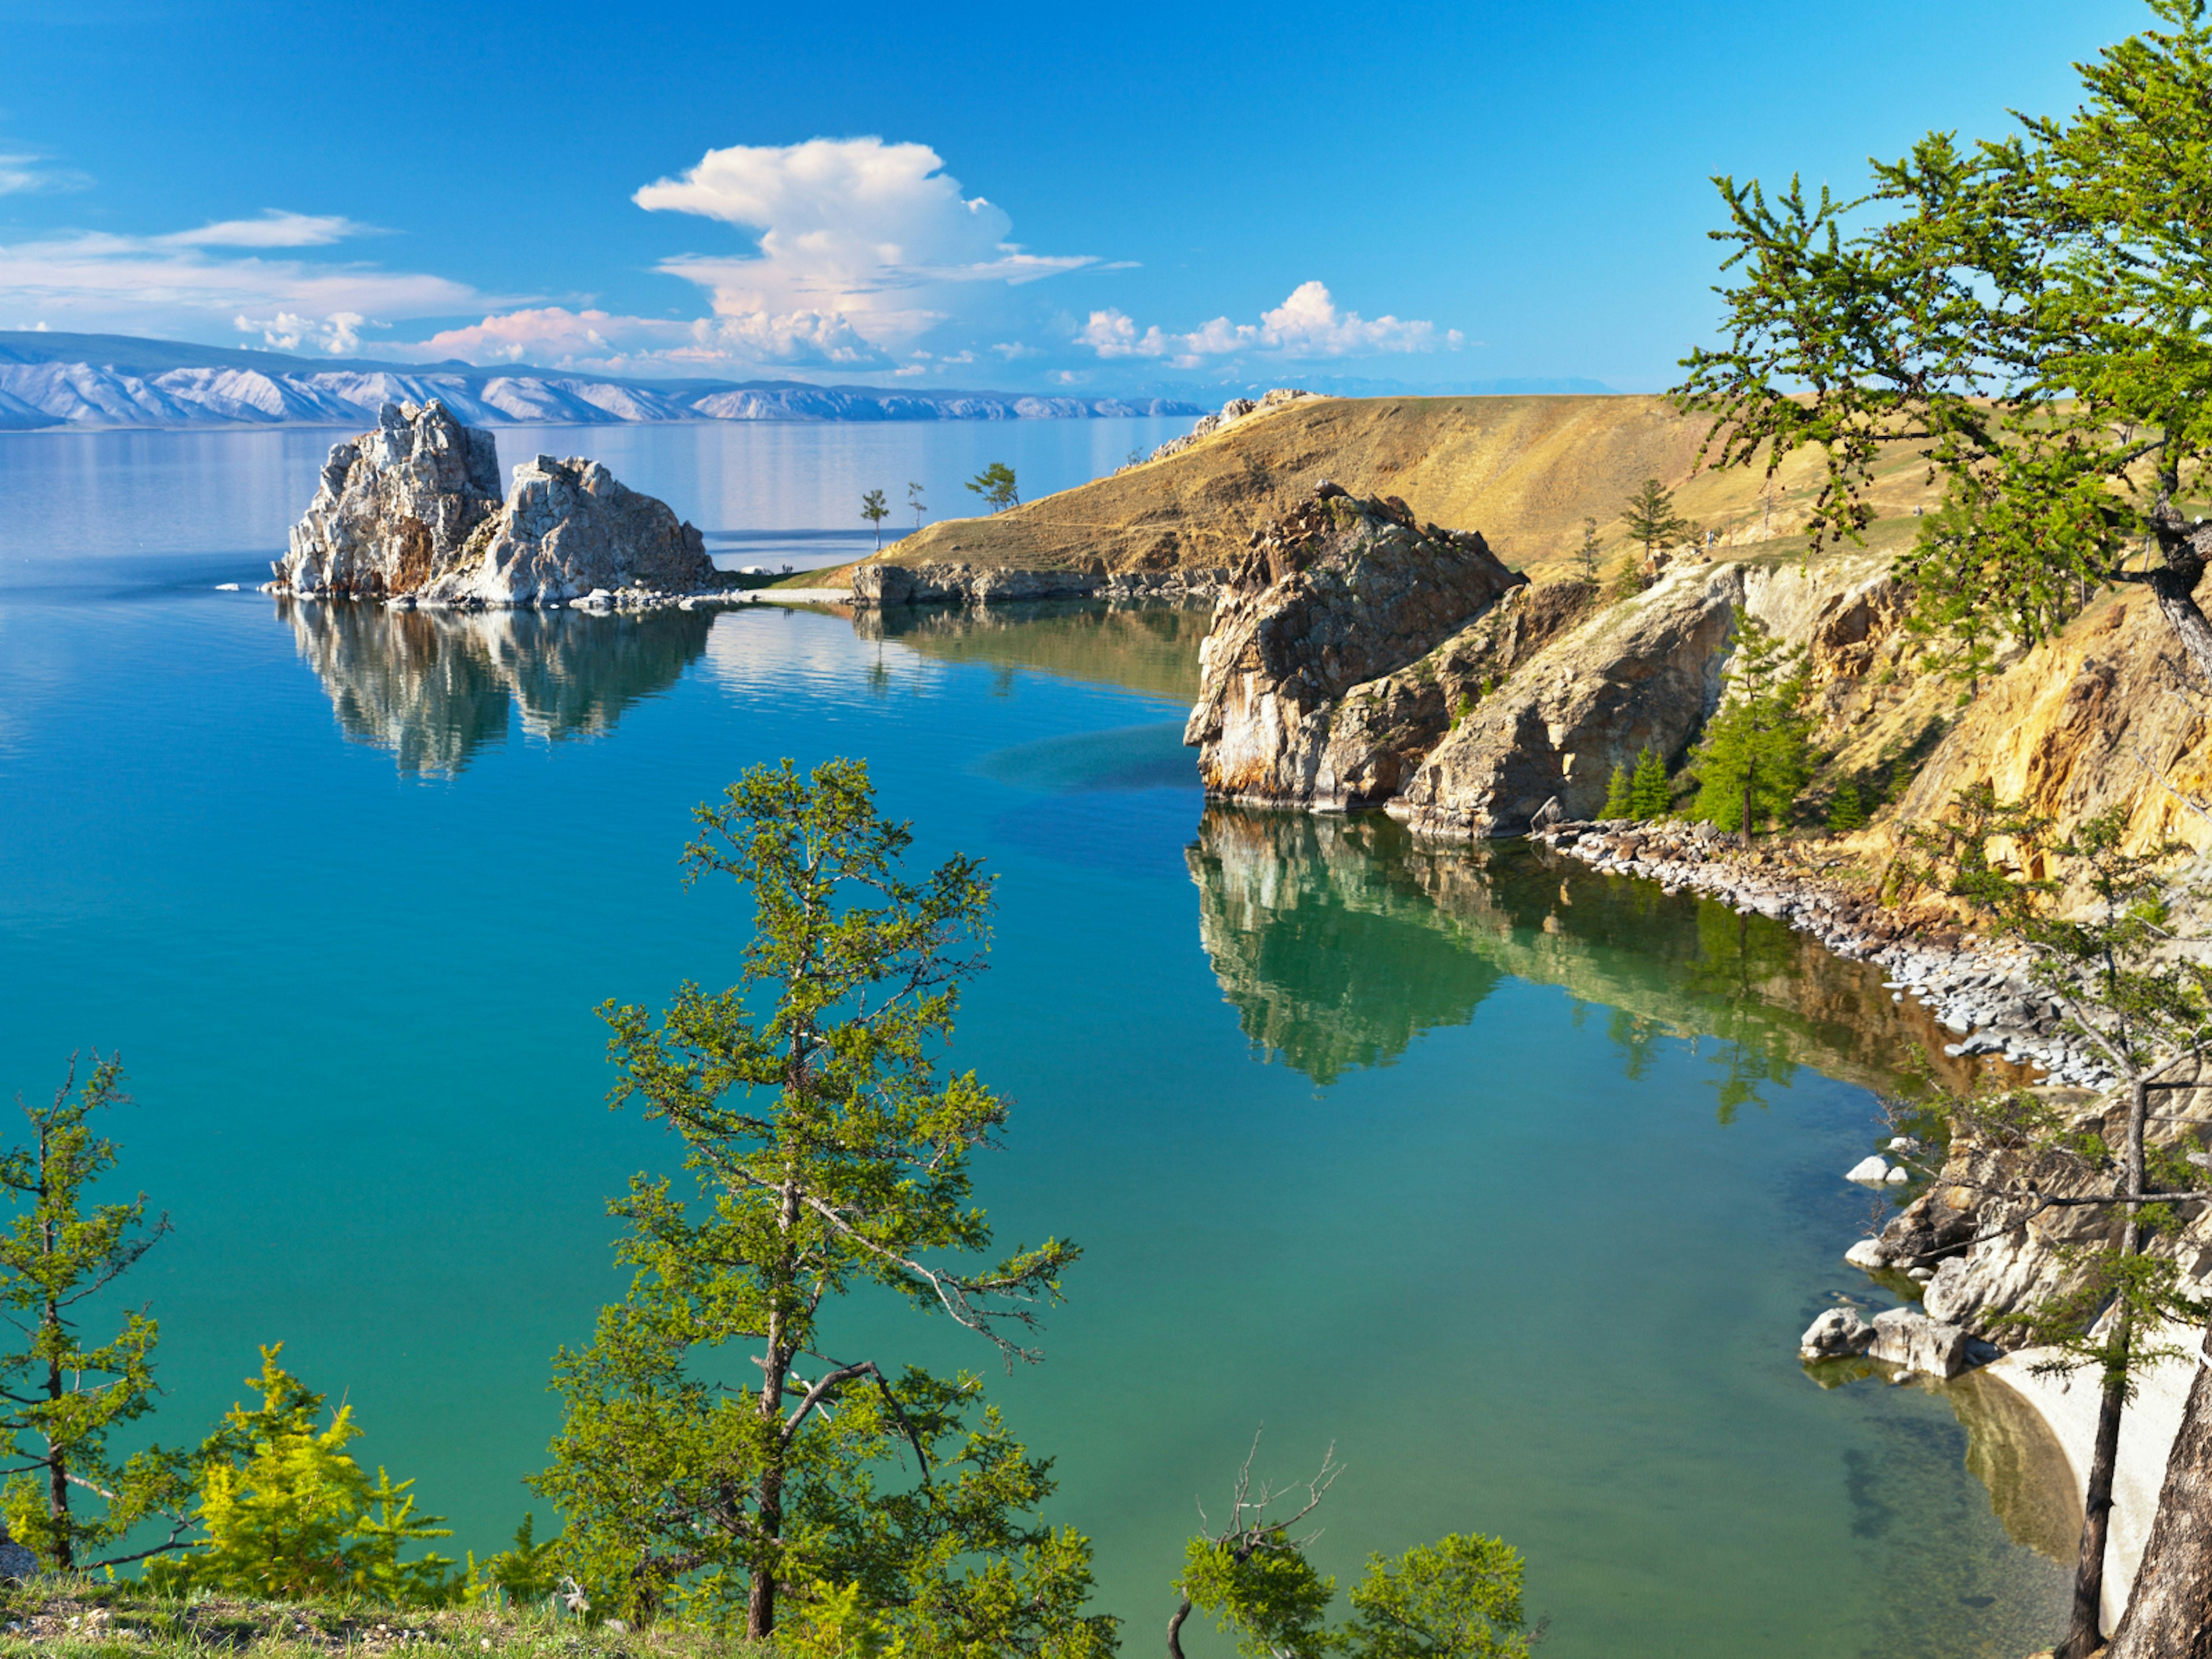 Lake Baikal is one of the most popular destinations along the Trans-Mongolian route © Katvic / Shutterstock